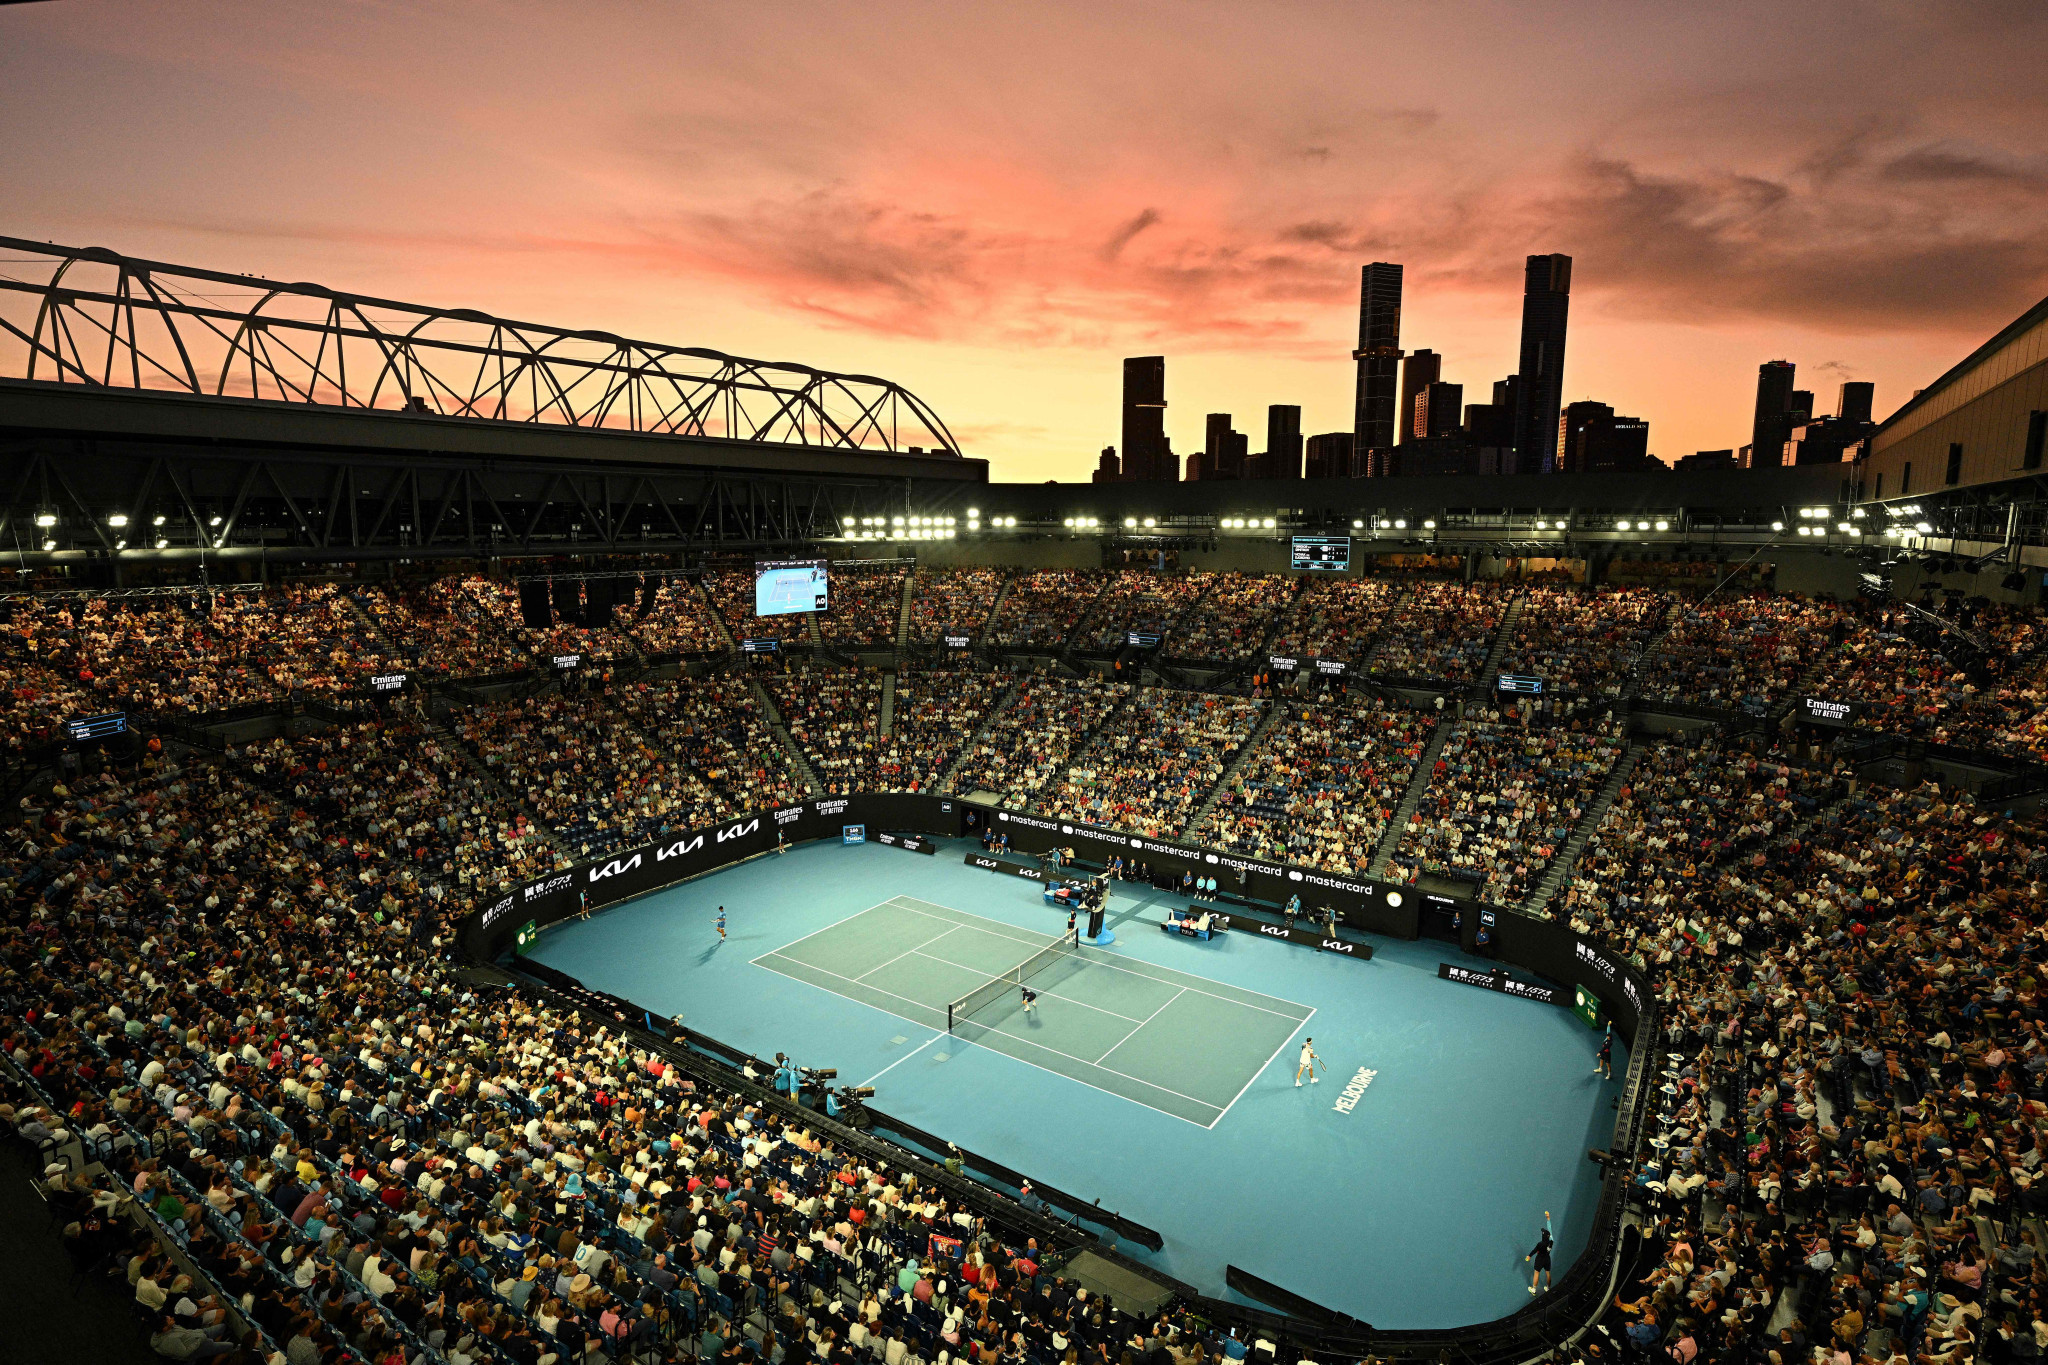 New daily attendance figure of more than 94,000 set at Australian Open